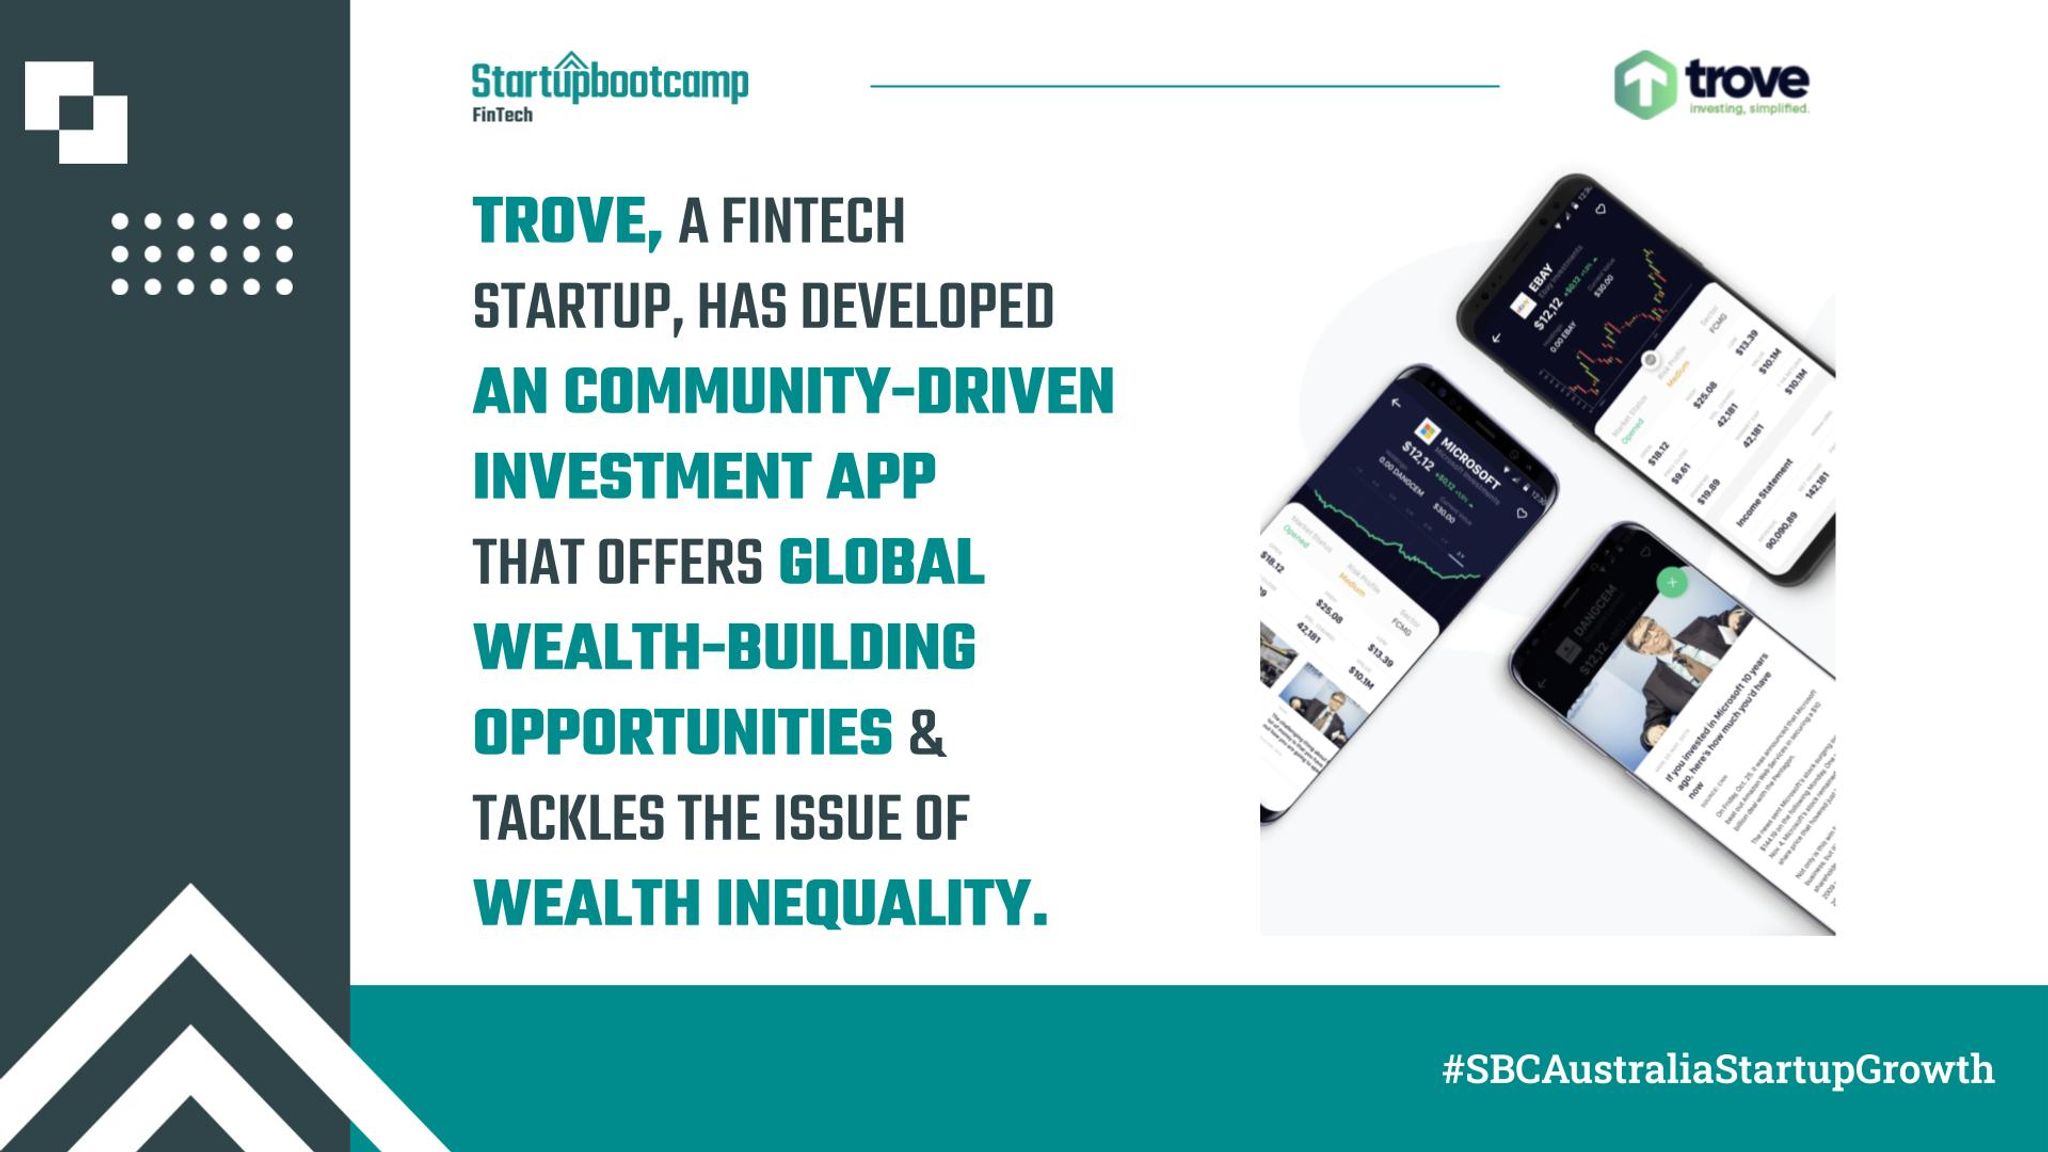  Trove, the Startup Solving Wealth Inequality through Financial Investing